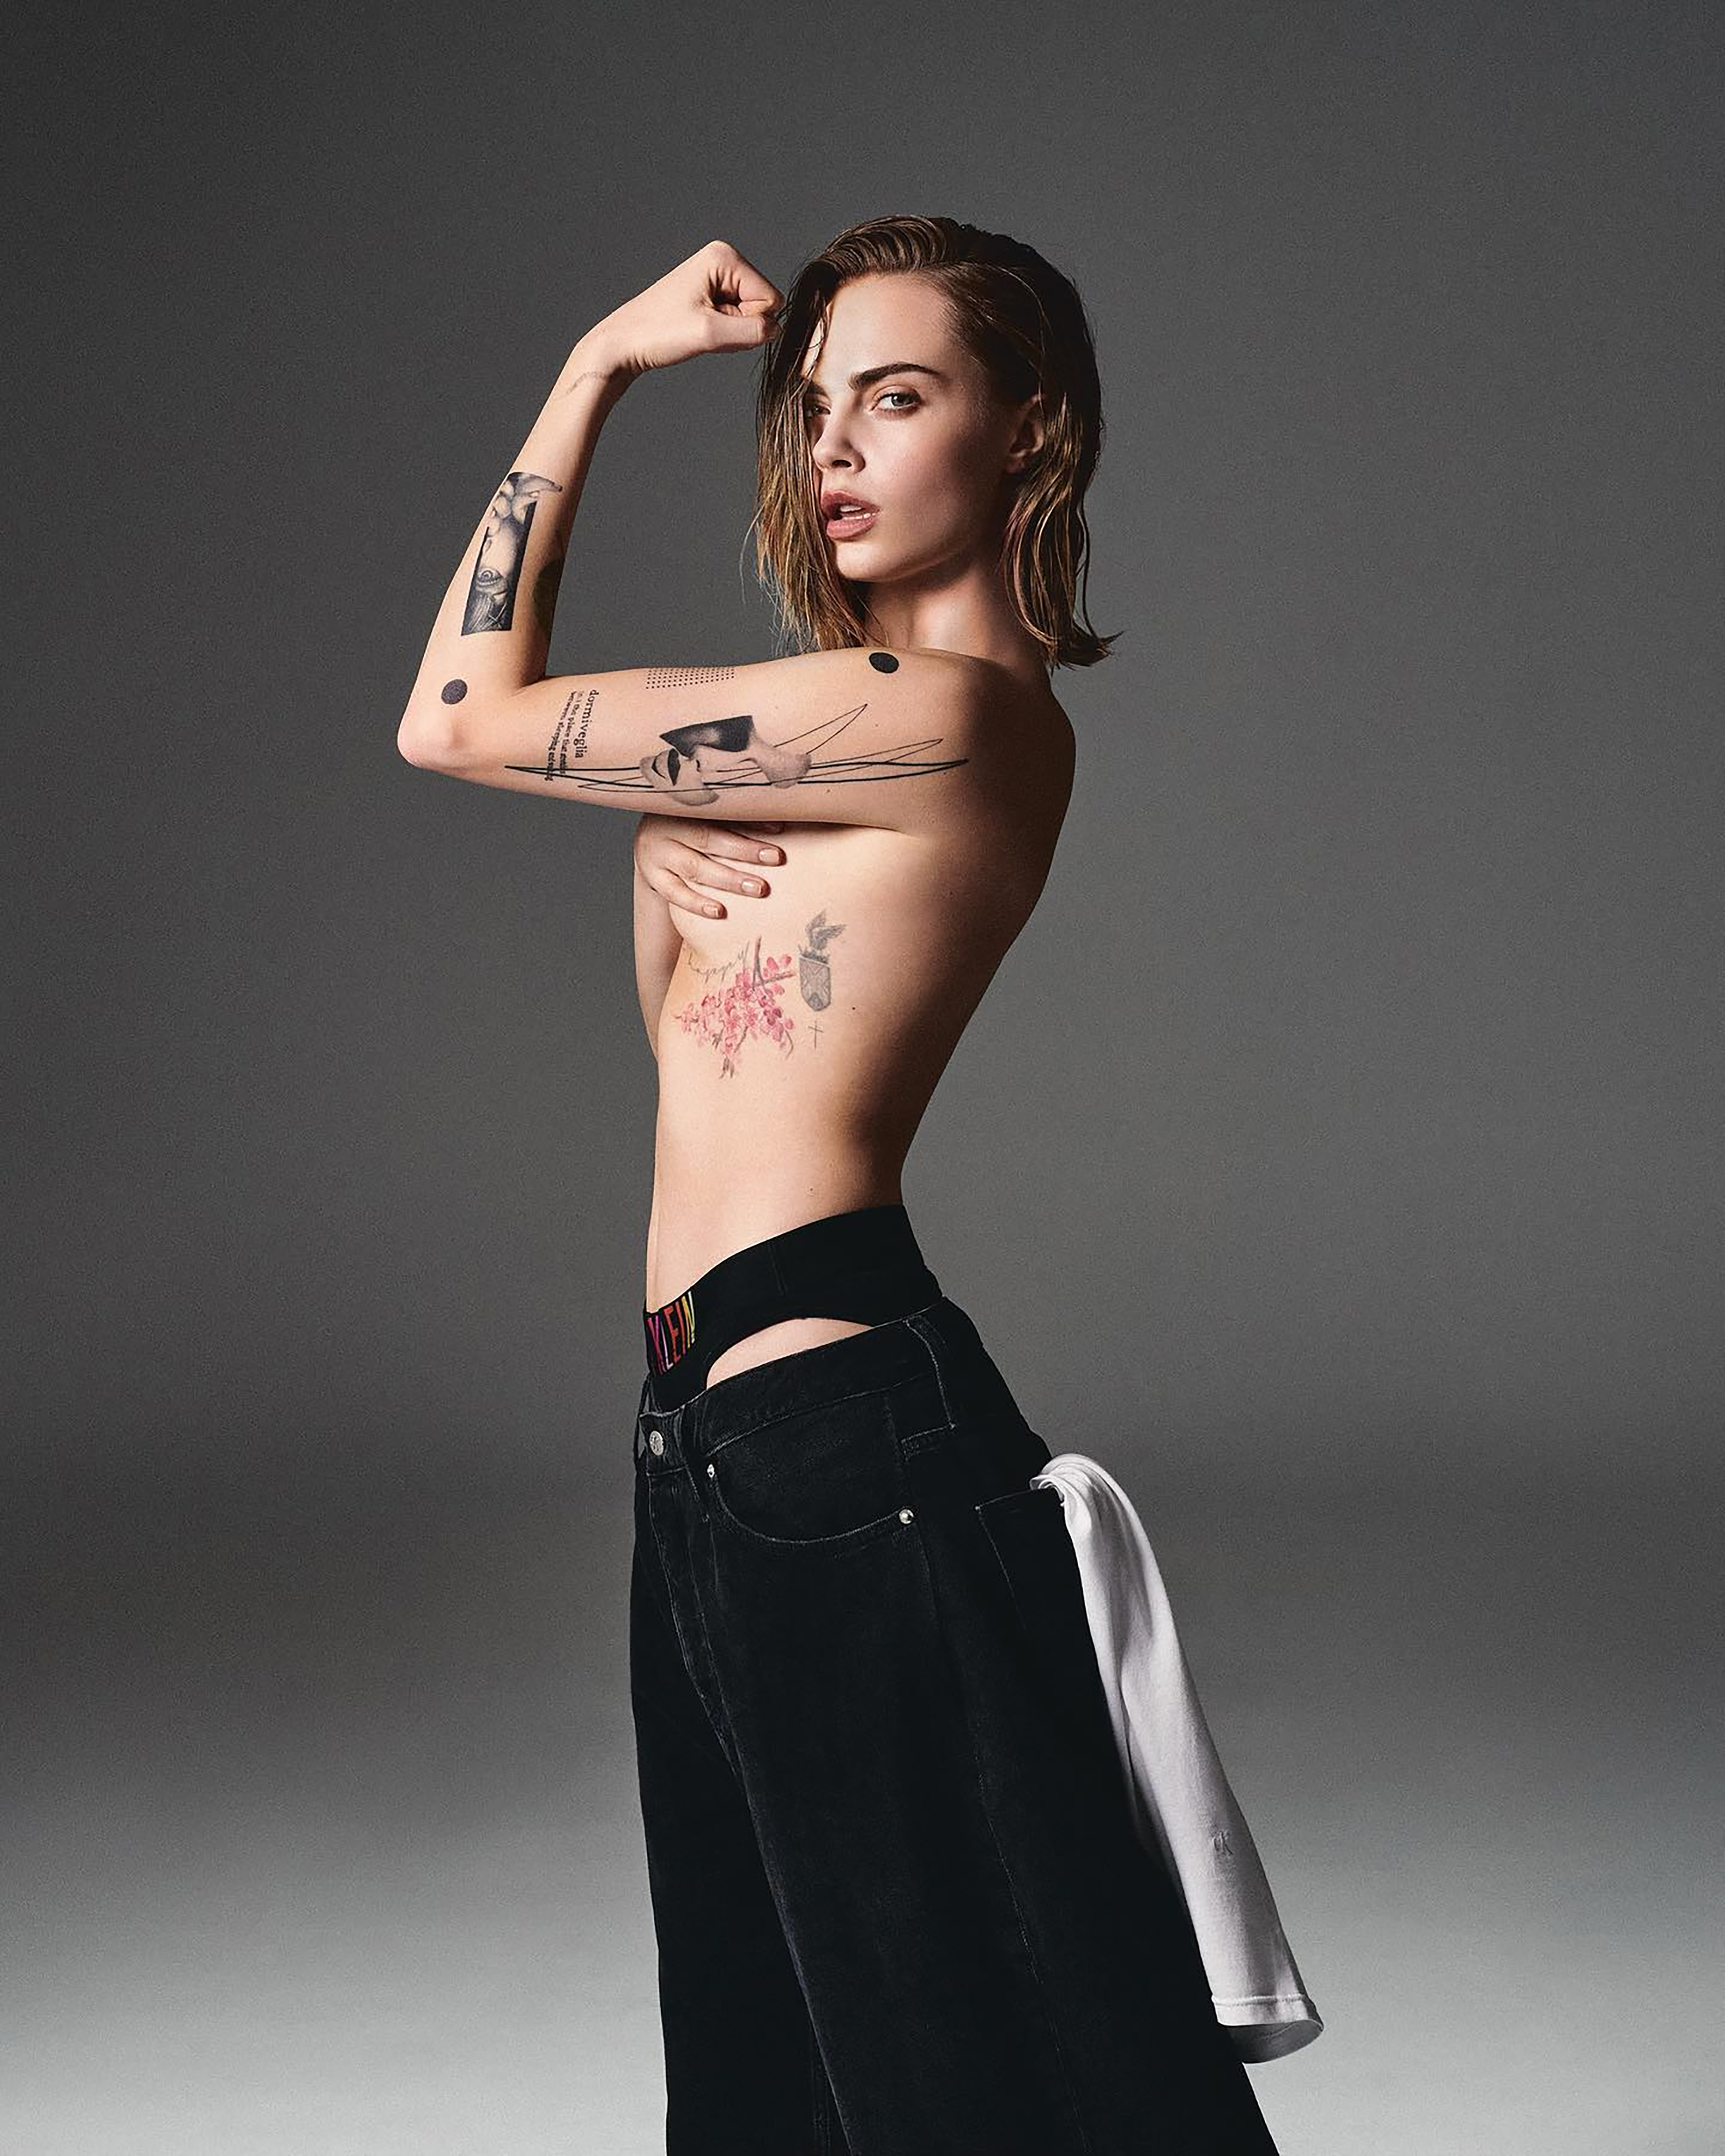 In another pic Cara flexed as she showed off her impressive tattoo collection